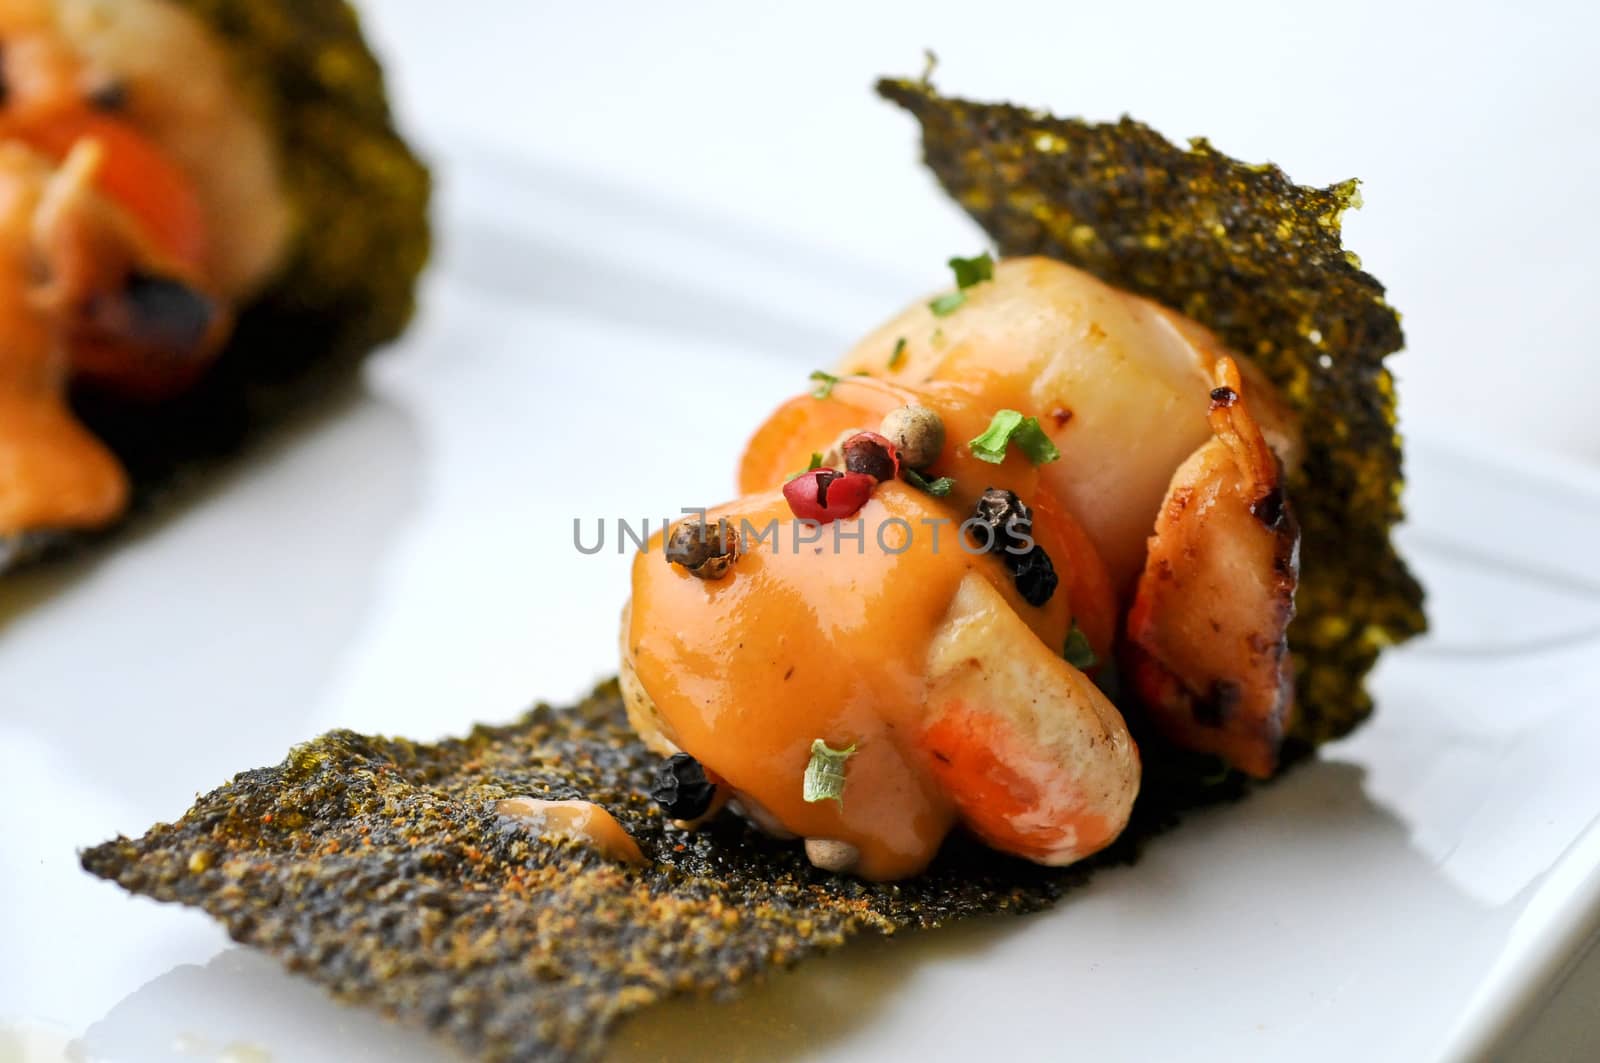 Delicacy grilled scallops with sour sauce on crispy seaweed